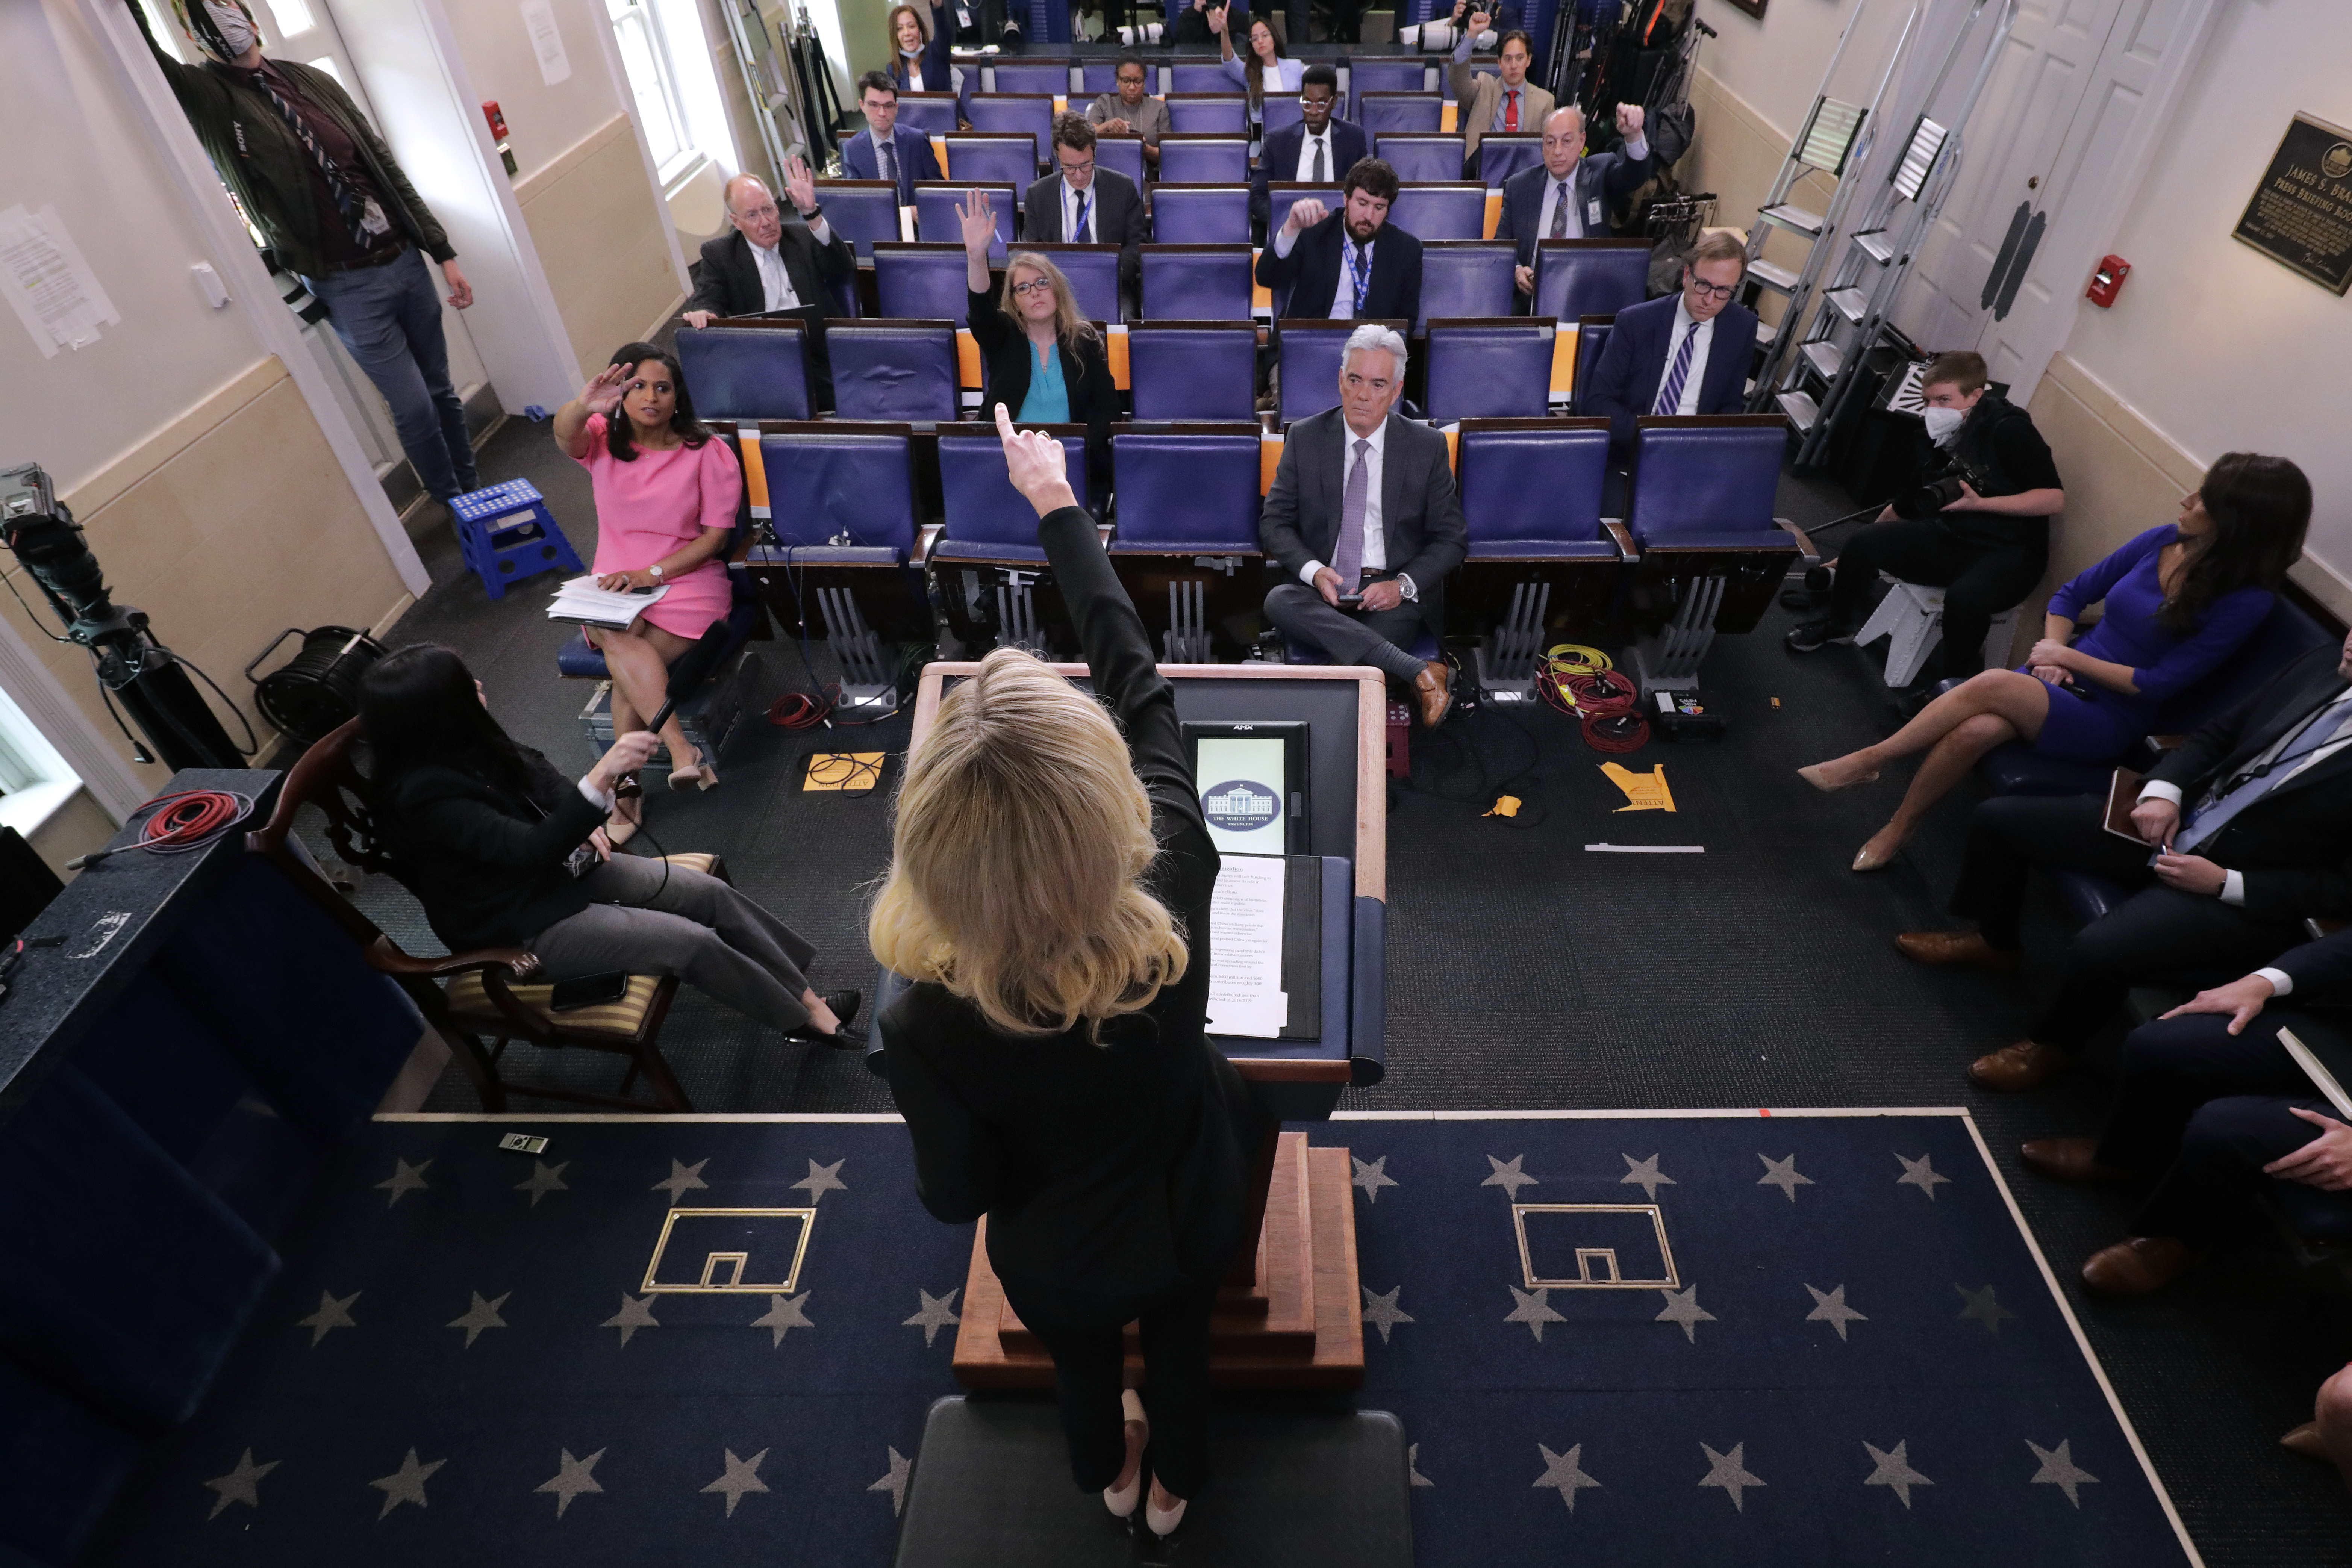 WASHINGTON, DC - MAY 01: White House Press Secretary Kayleigh McEnany calls on reporters during her first on-camera news conference in the James Brady Press Briefing Room at the White House May 01, 2020 in Washington, DC. Appointed on April 7, McEnany became President Donald Trump's fourth press secretary in just over three years. This was the first formal briefing by a White House press secretary since Sarah Huckabee Sanders answered questions from the podium on March 11, 2019. (Photo by Chip Somodevilla/Getty Images)